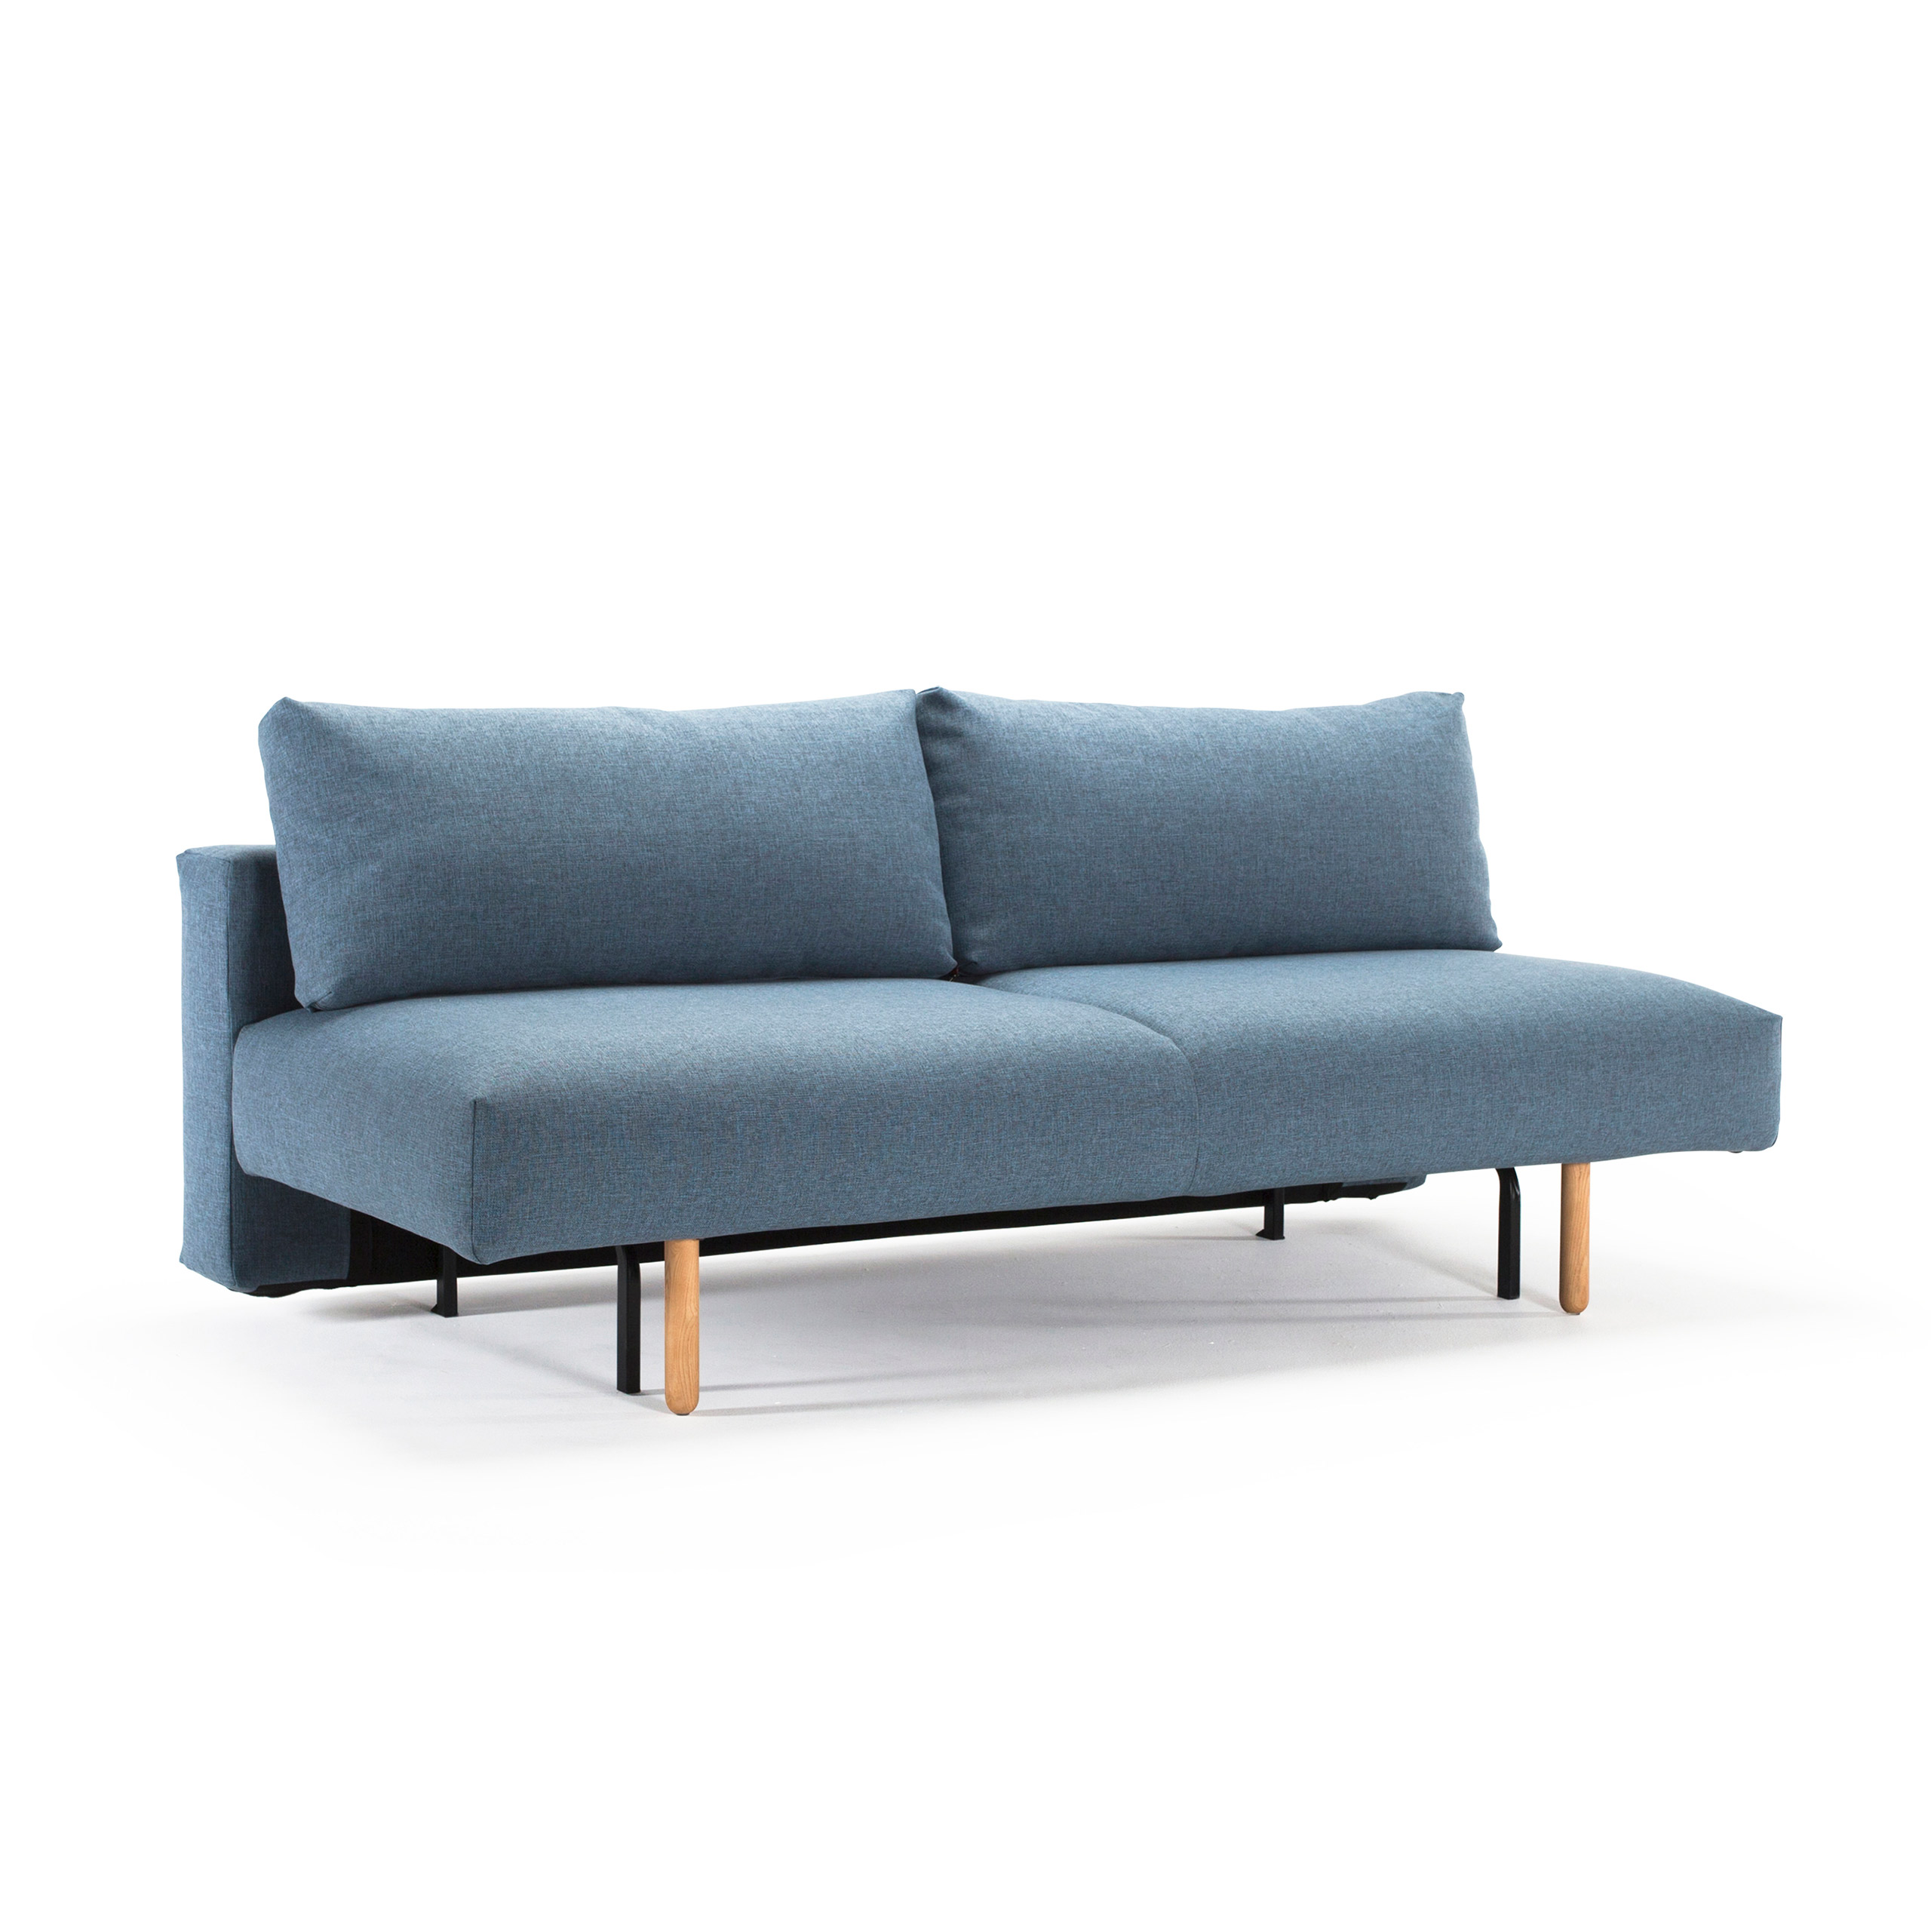 Frode Sofa Bed Timeless Design By, Scandi Design Sofa Bed